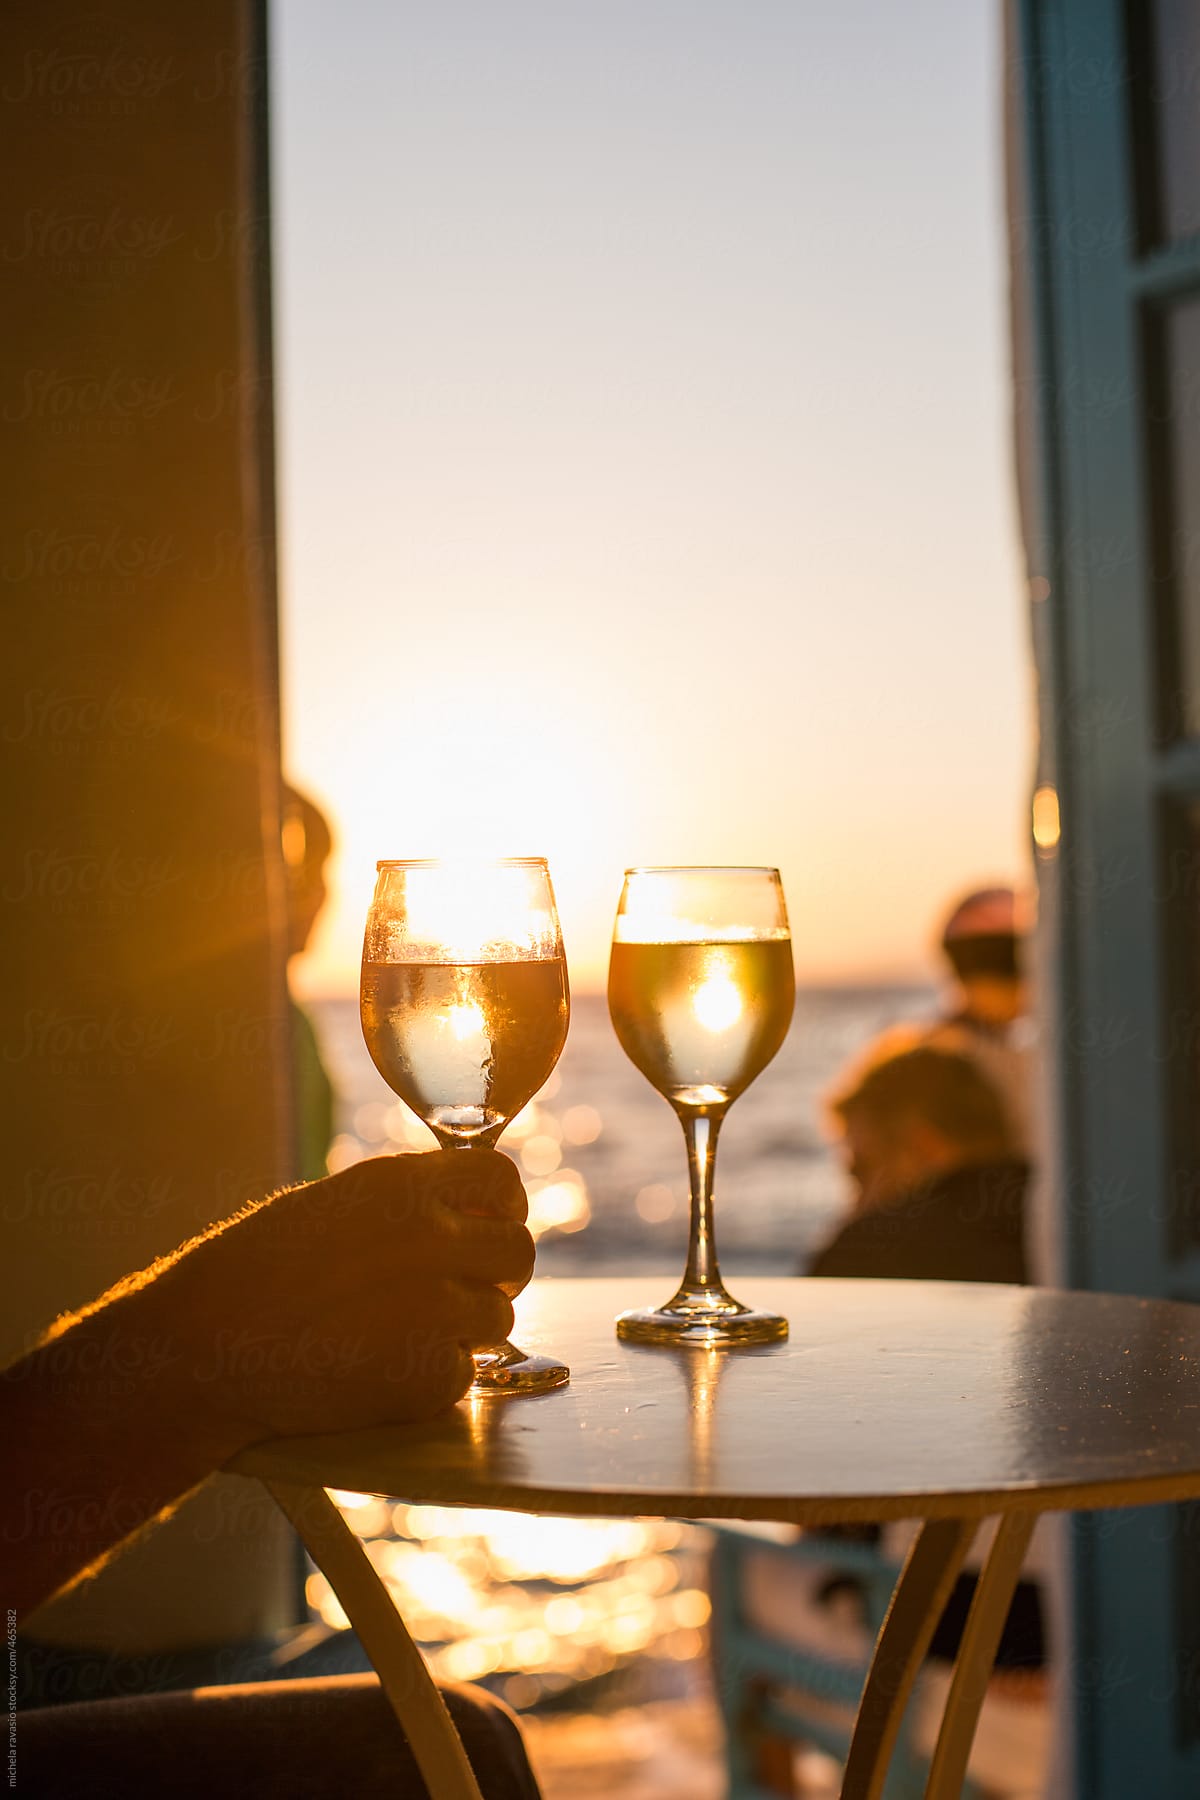 Man holding a glass of white wine at sunset near the sea